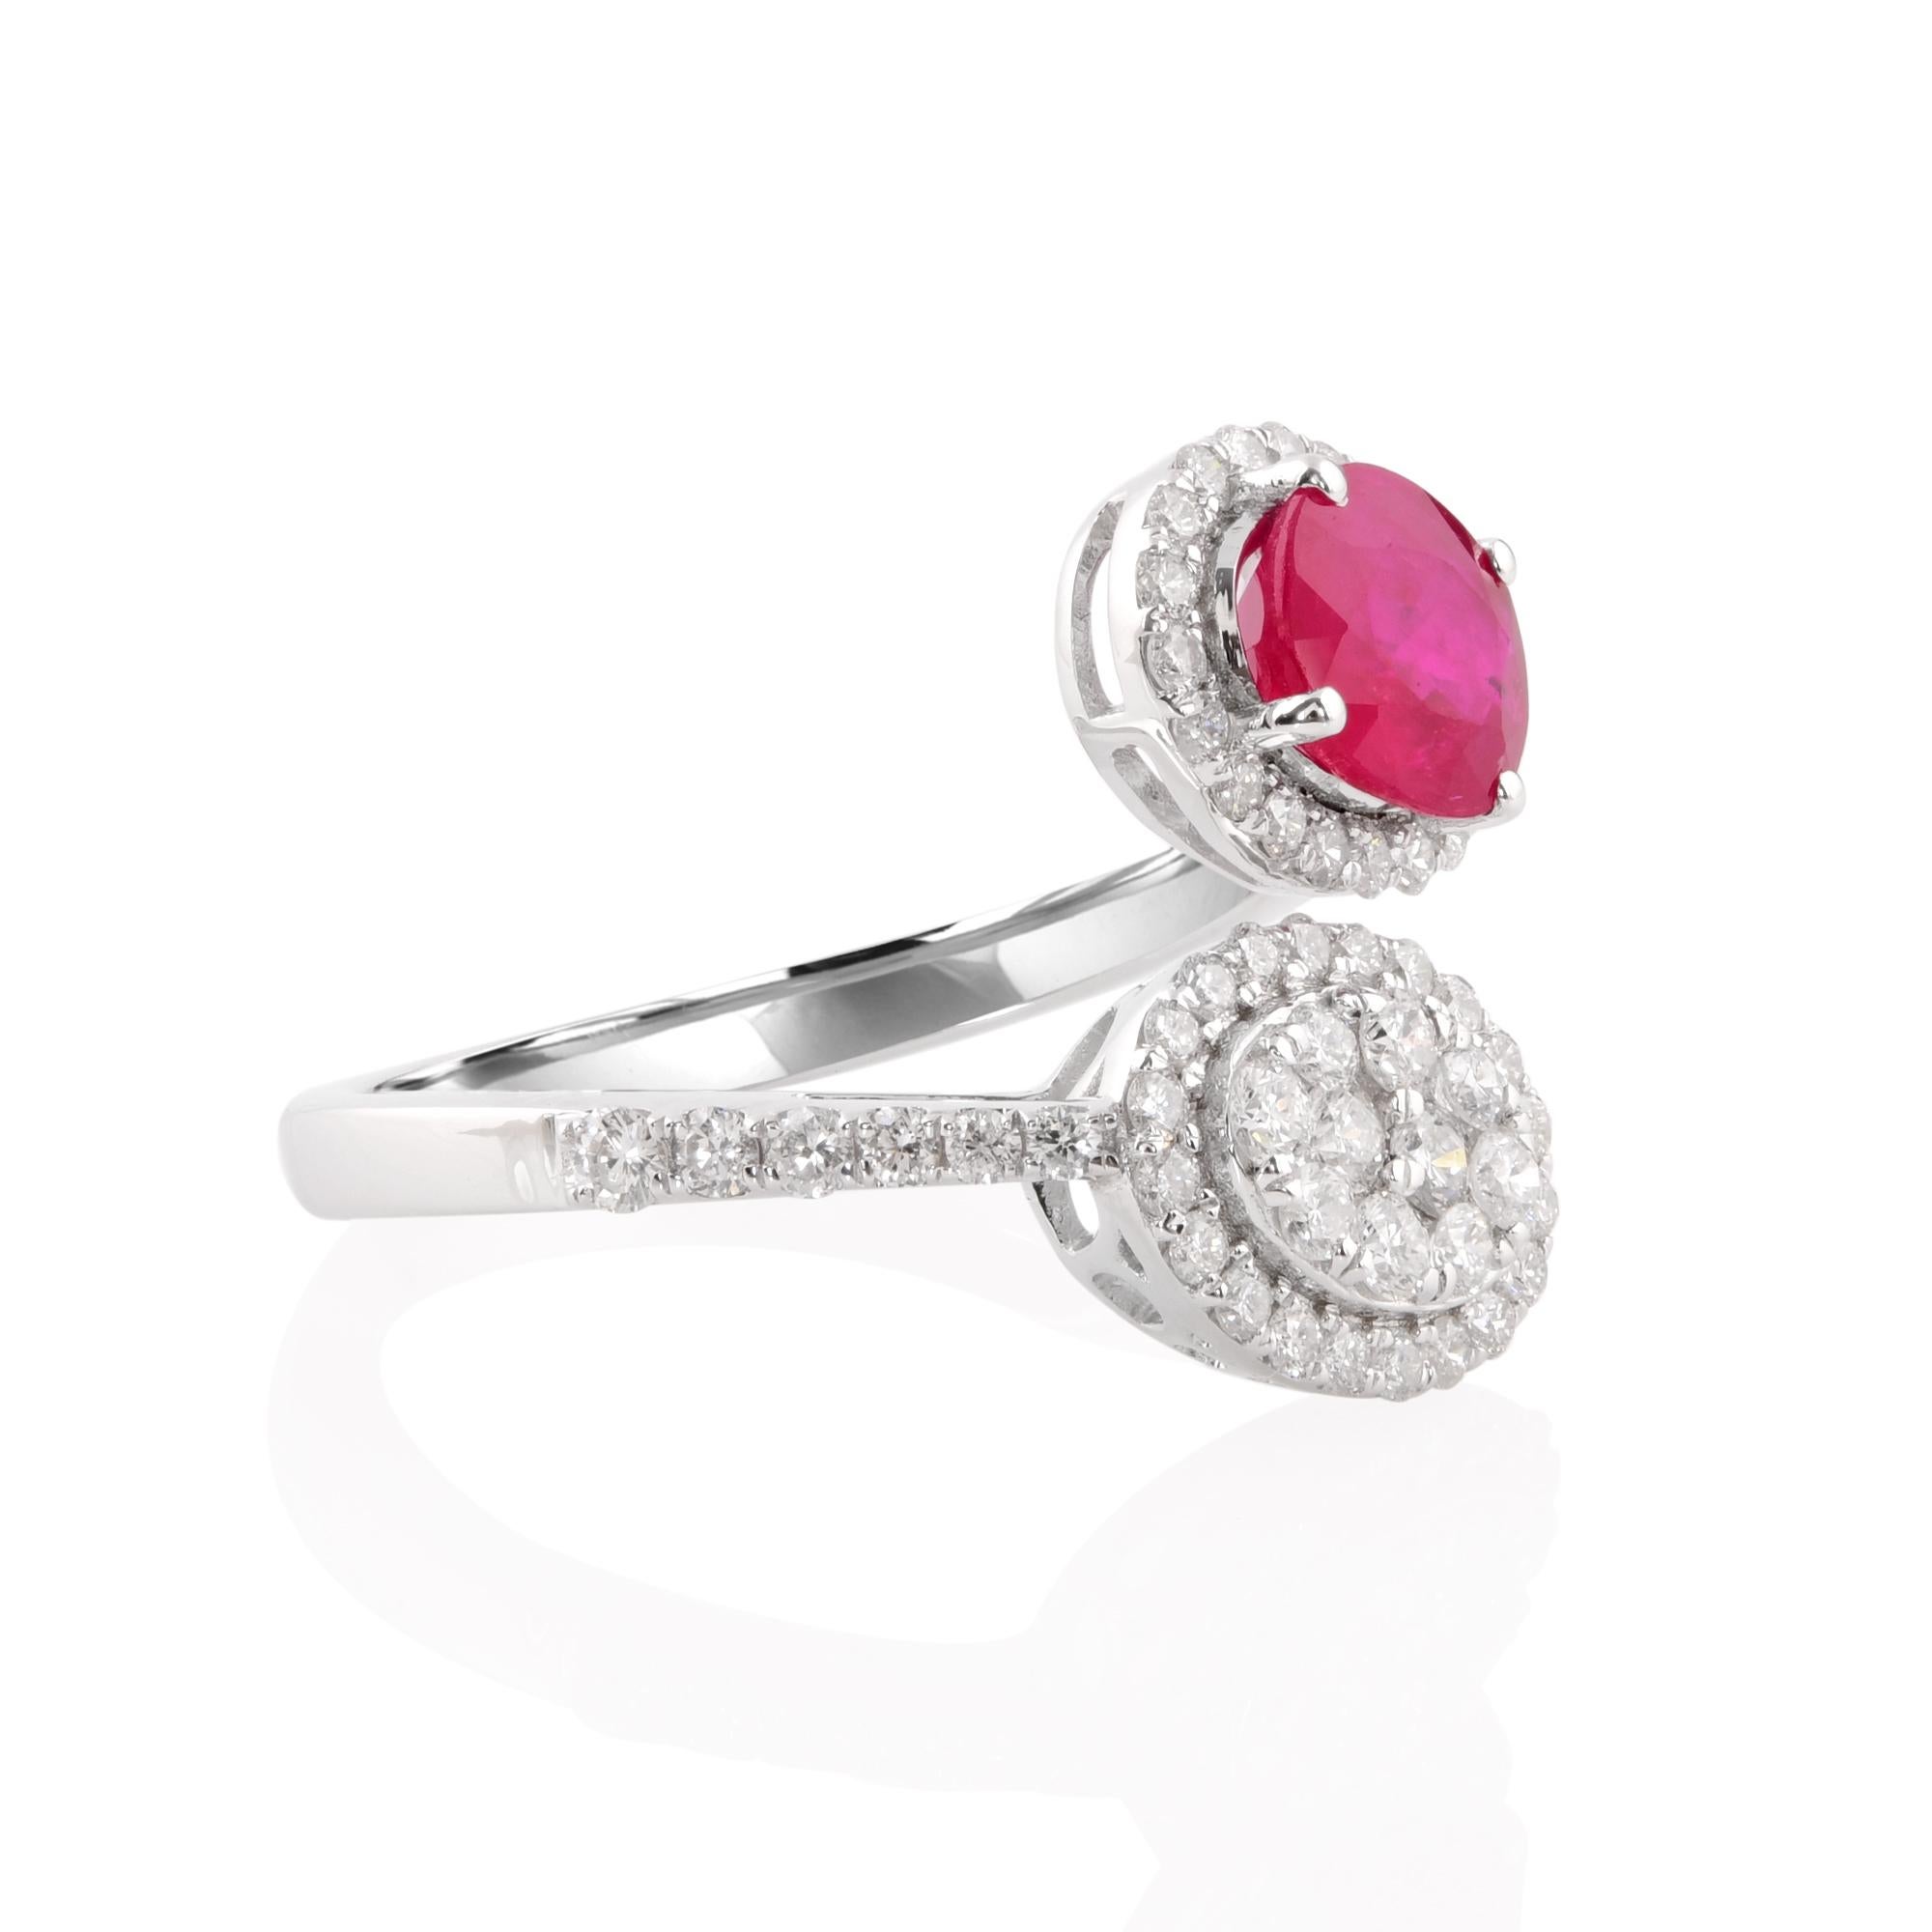 Experience the unparalleled beauty and sophistication of this exquisite Natural Oval Ruby Gemstone Wrap Ring, accented with shimmering diamonds and meticulously crafted in luxurious 18 karat white gold. This stunning piece of fine jewelry is a